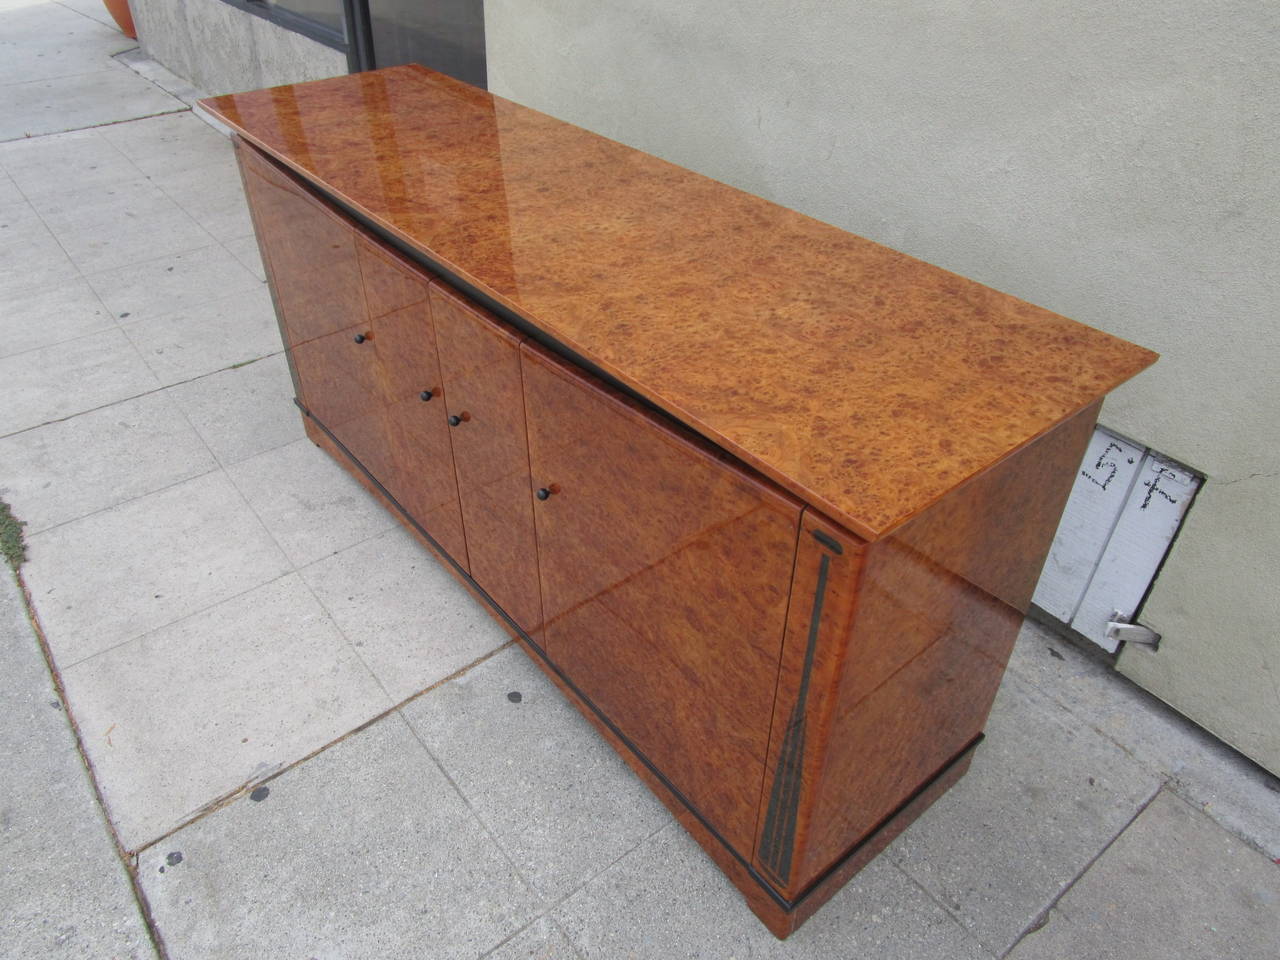 This high end  credenza has its original polyester varnish which is from far the sturdier and glossier varnish.
The 3 doors open on a glass shelf.
The knobs are black lacquered little balls.
The matching 7' dining table is available.